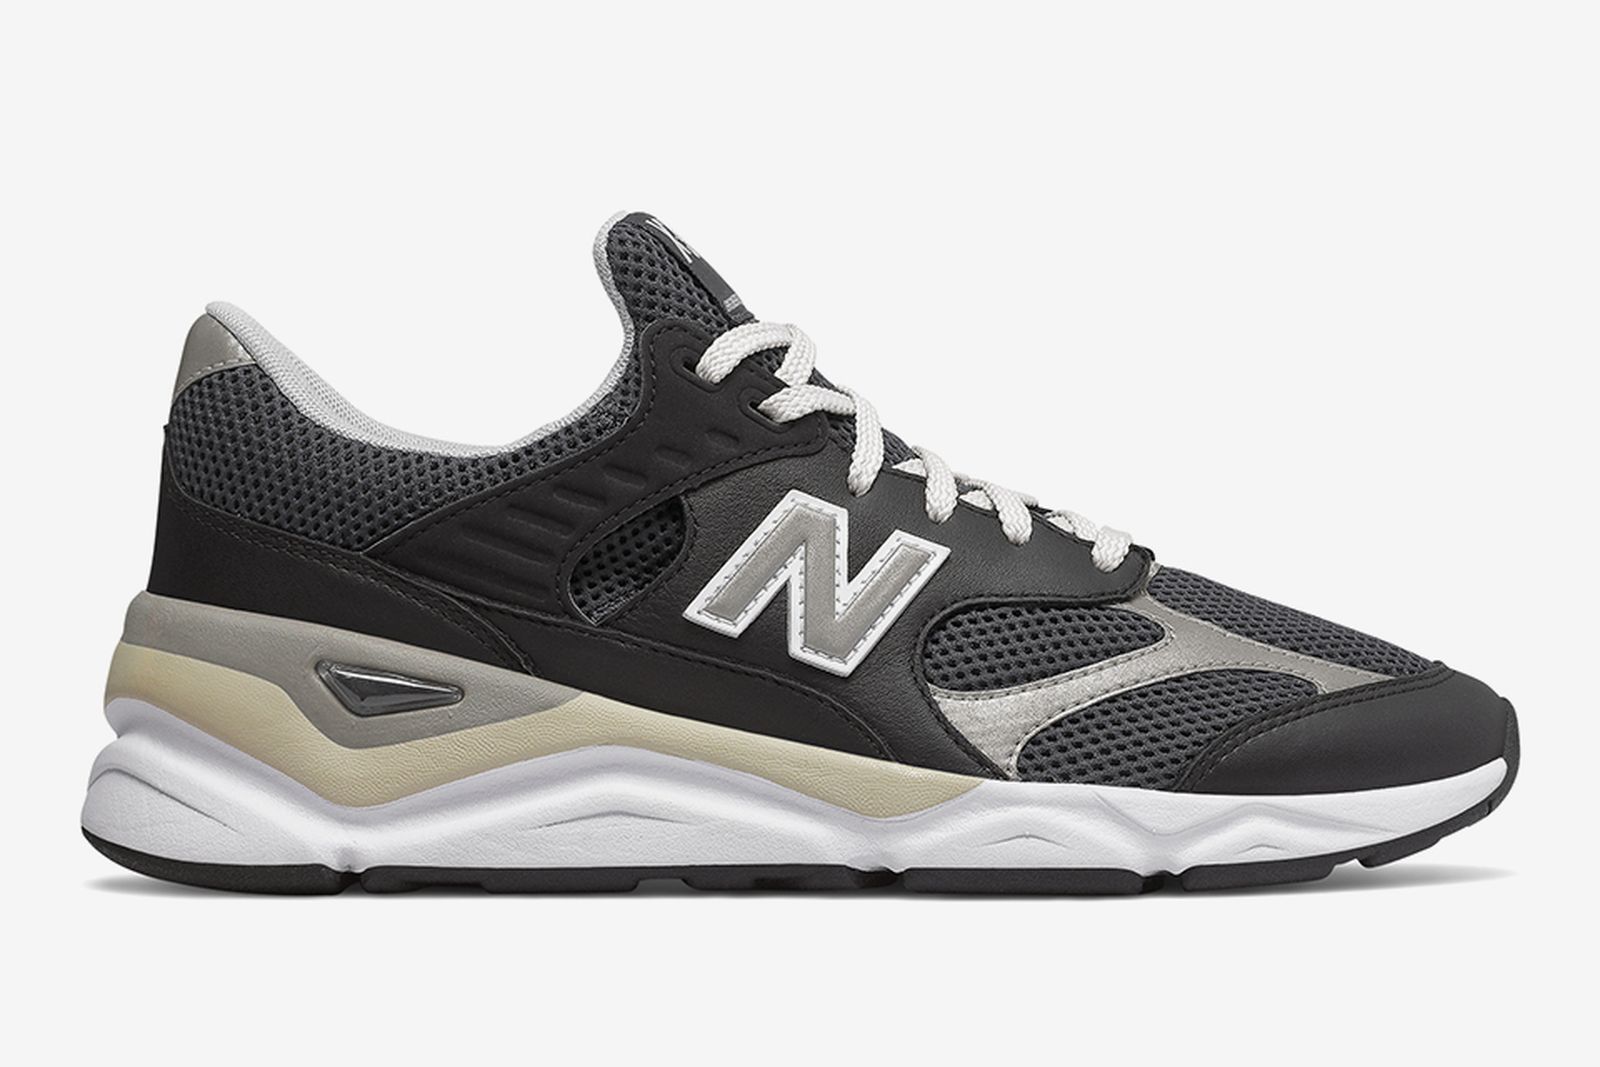 New Balance X-90 Pack: Date More Info